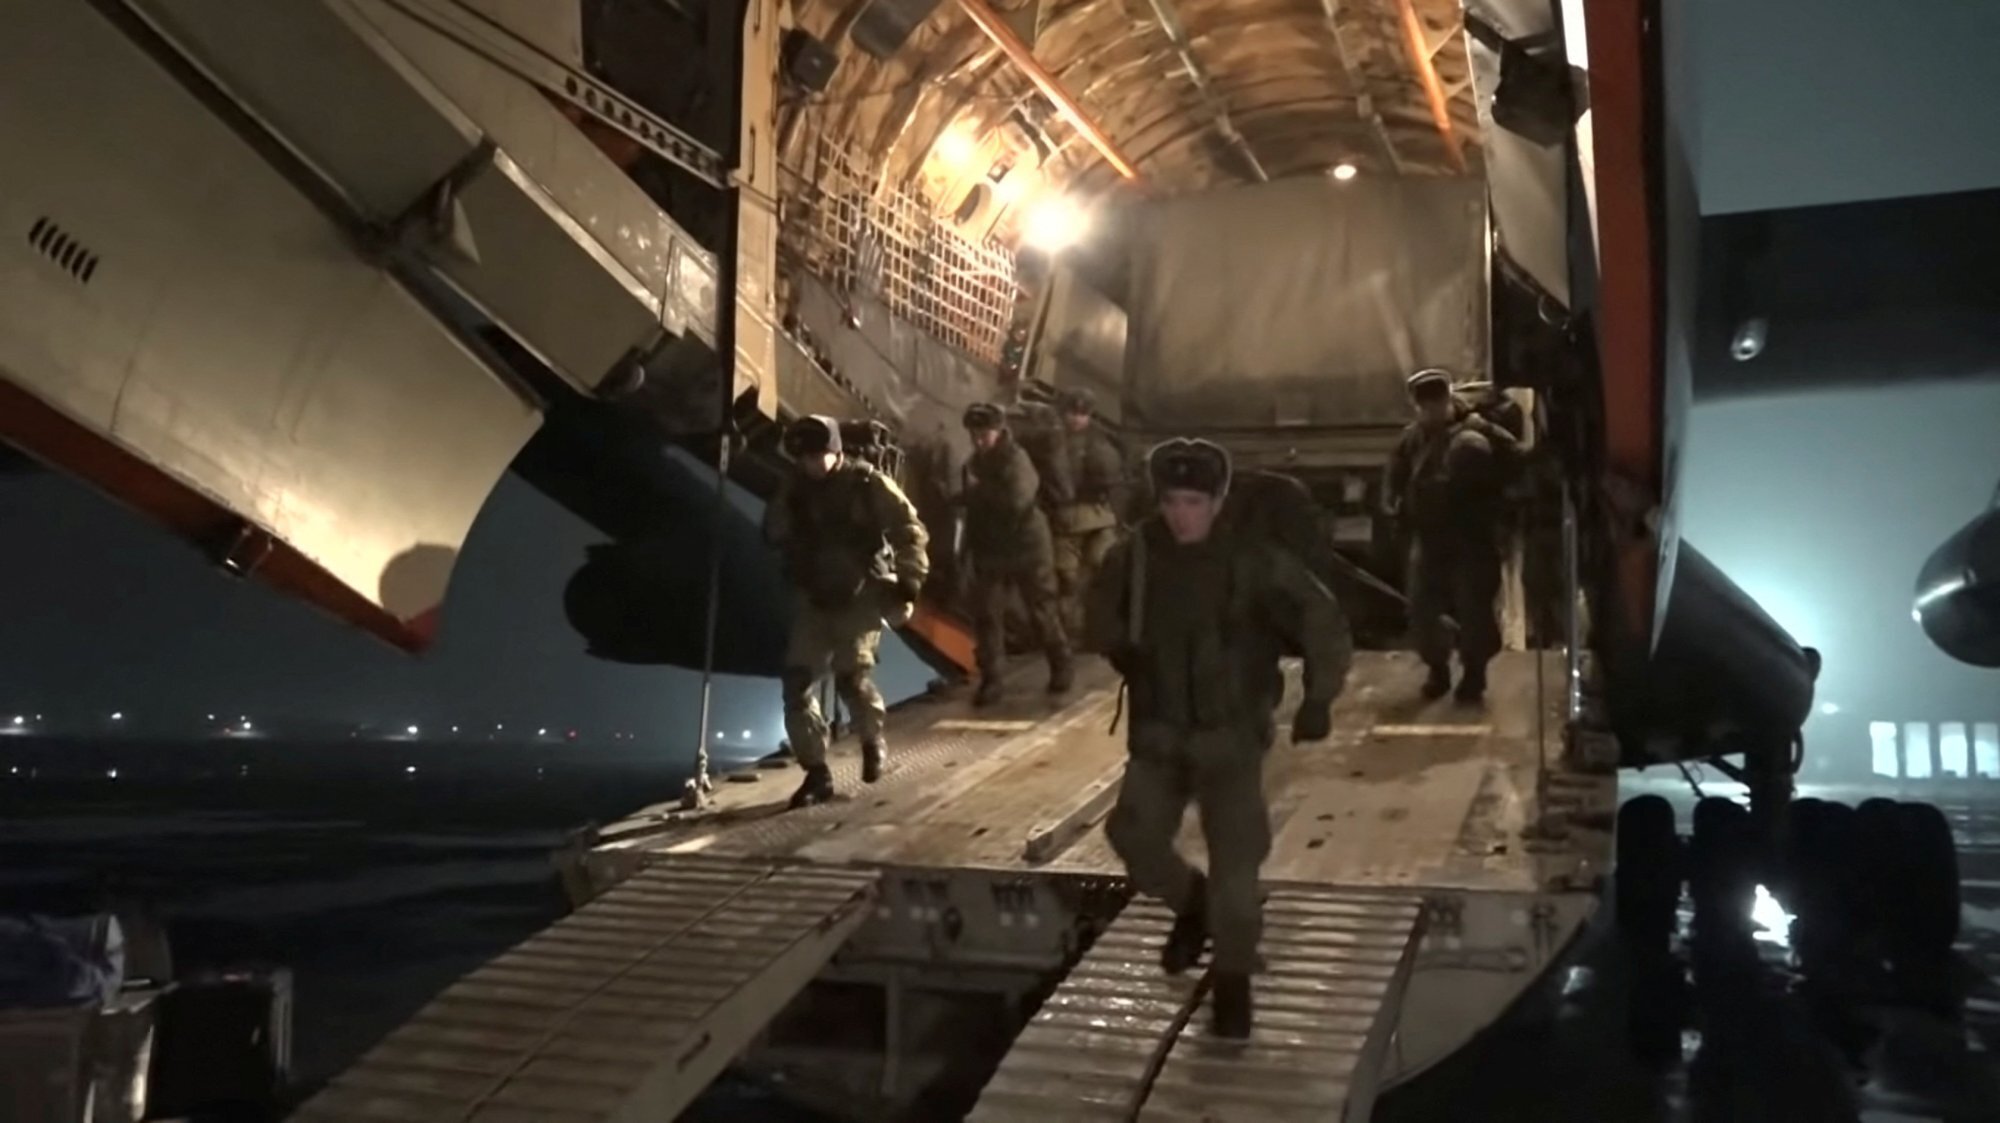 Russian service members disembark from a military aircraft as part of a peacekeeping mission from the Collective Security Treaty Organisation amid mass protests in Almaty and other Kazakh cities, at an airfield in Kazakhstan. This still image is from a video released by Russia’s Defence Ministry on January 8. Photo: Handout via Reuters